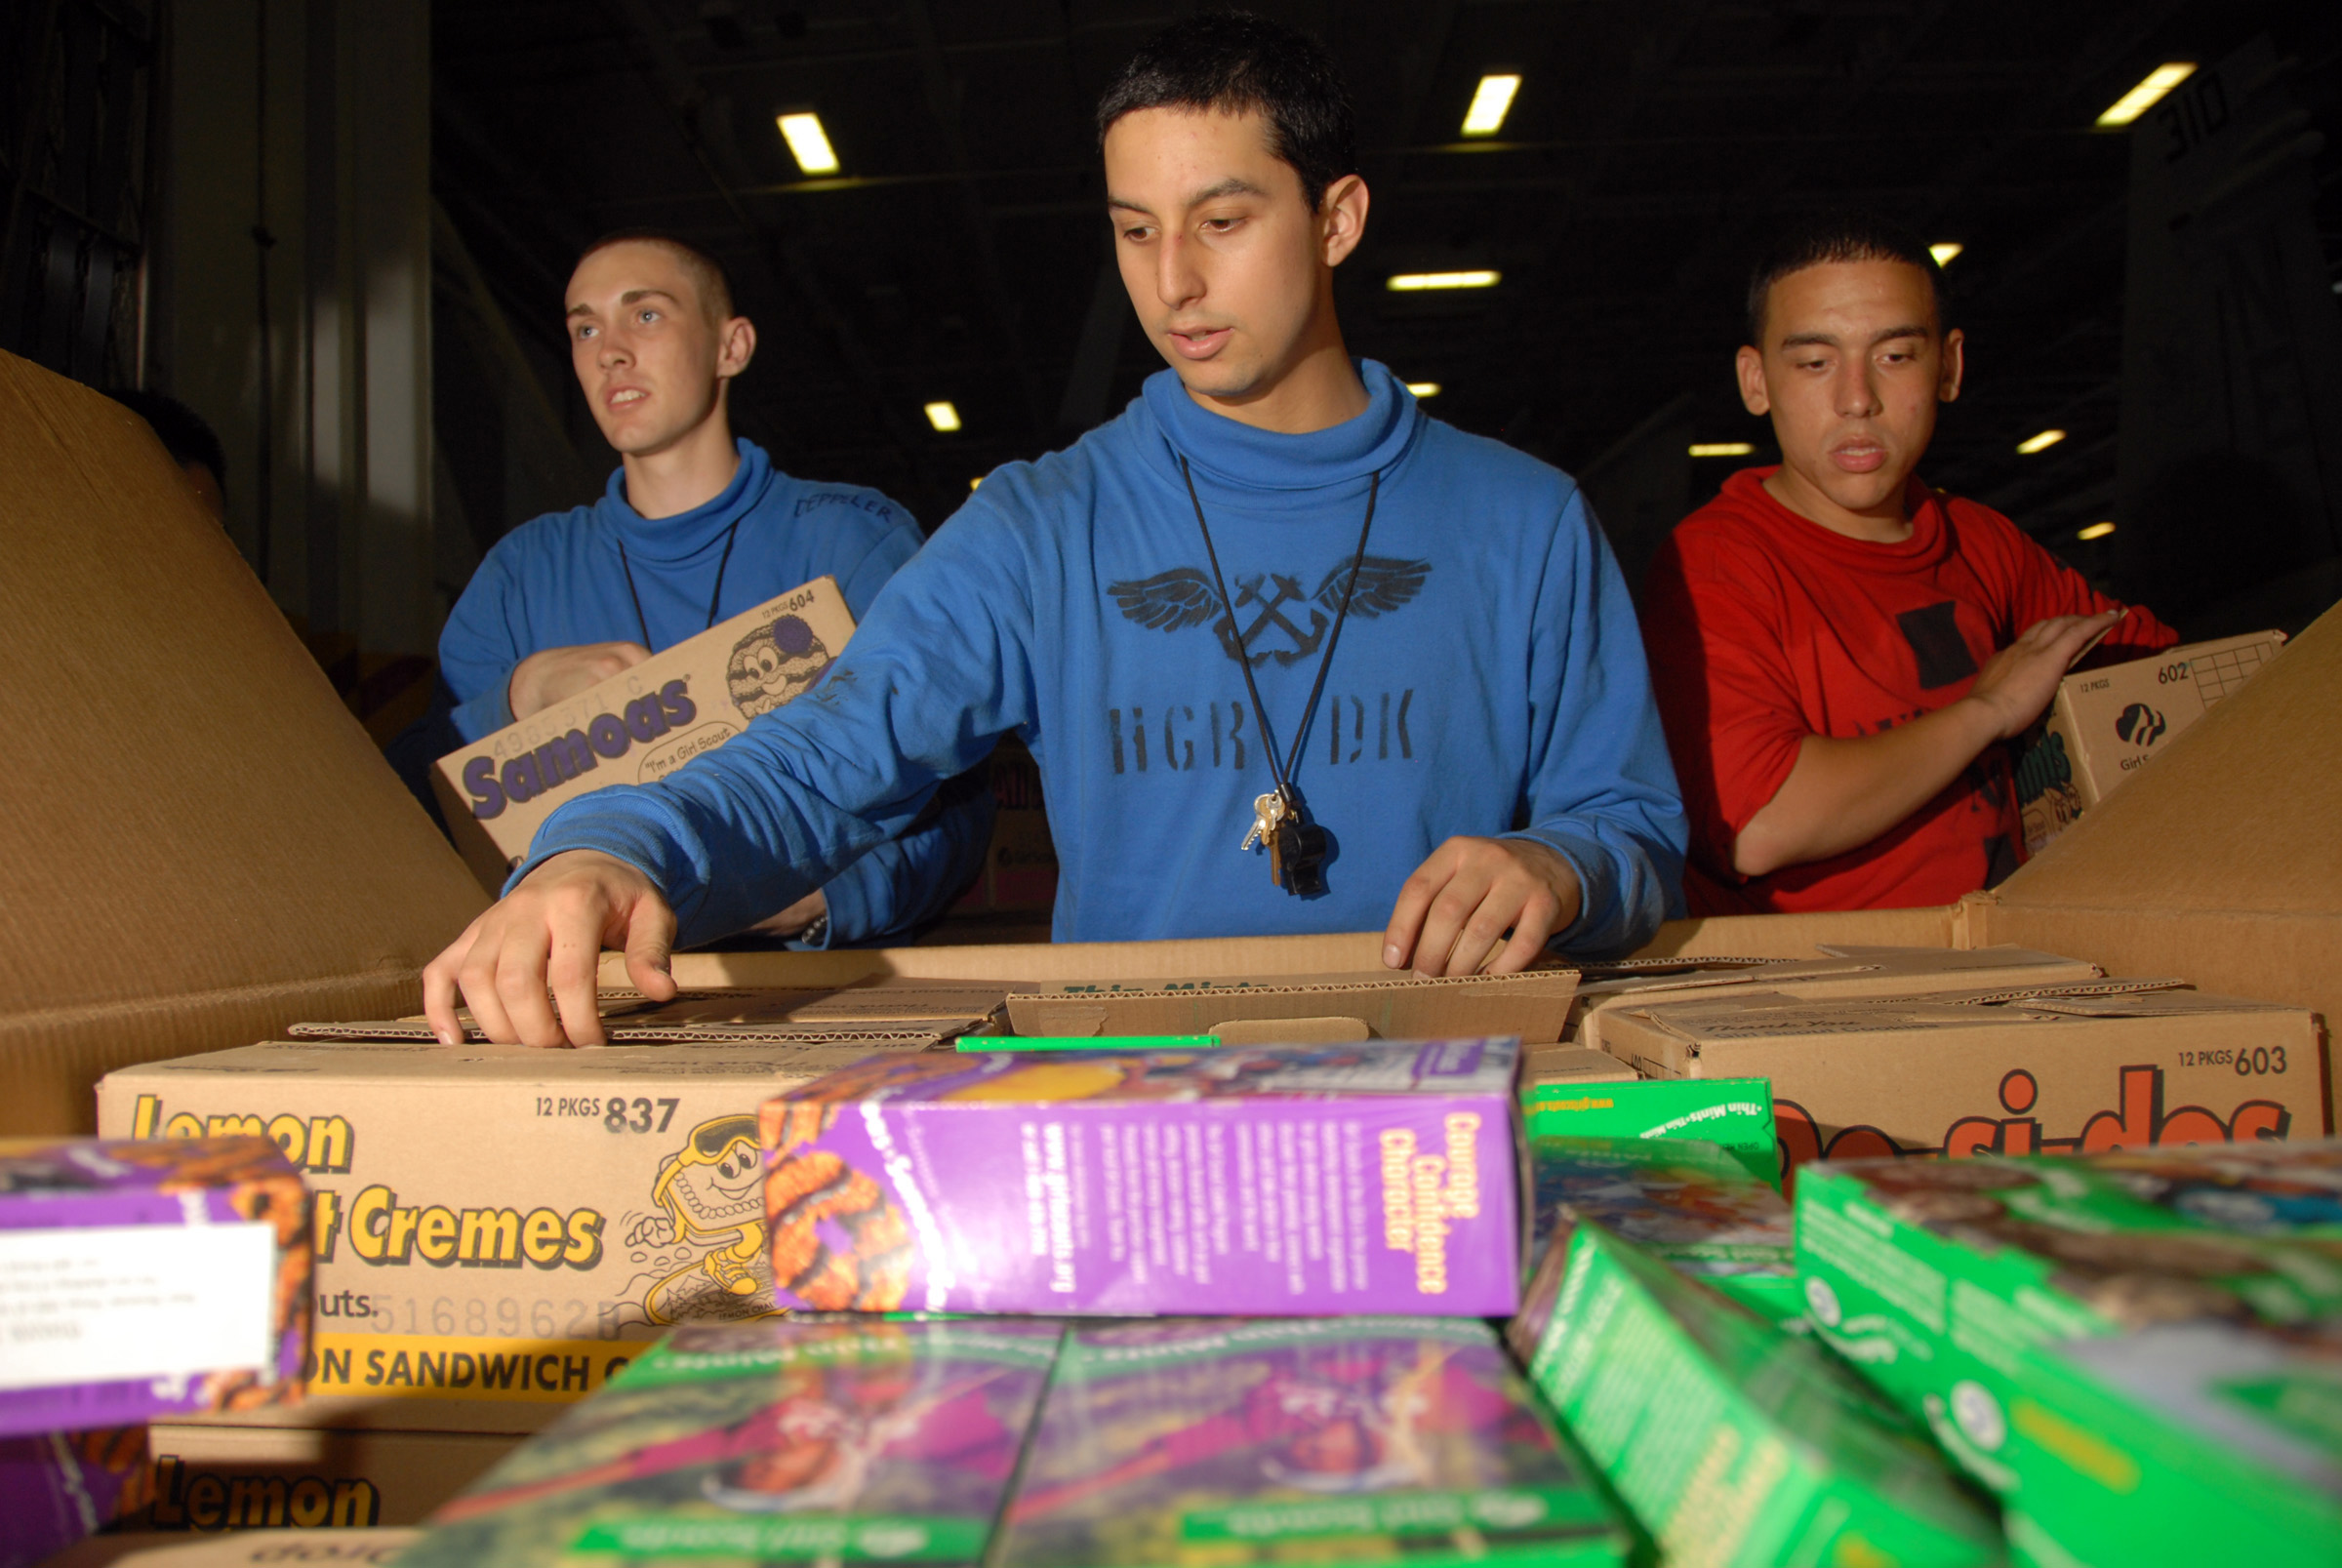 US Navy 080709-N-9450M-066 Aviation Boatswain's Mate (Handling) Airman Cristian Orkiz distributes free Girl Scout Cookies sent by Junior Troop 818 of Woodinville, Wash